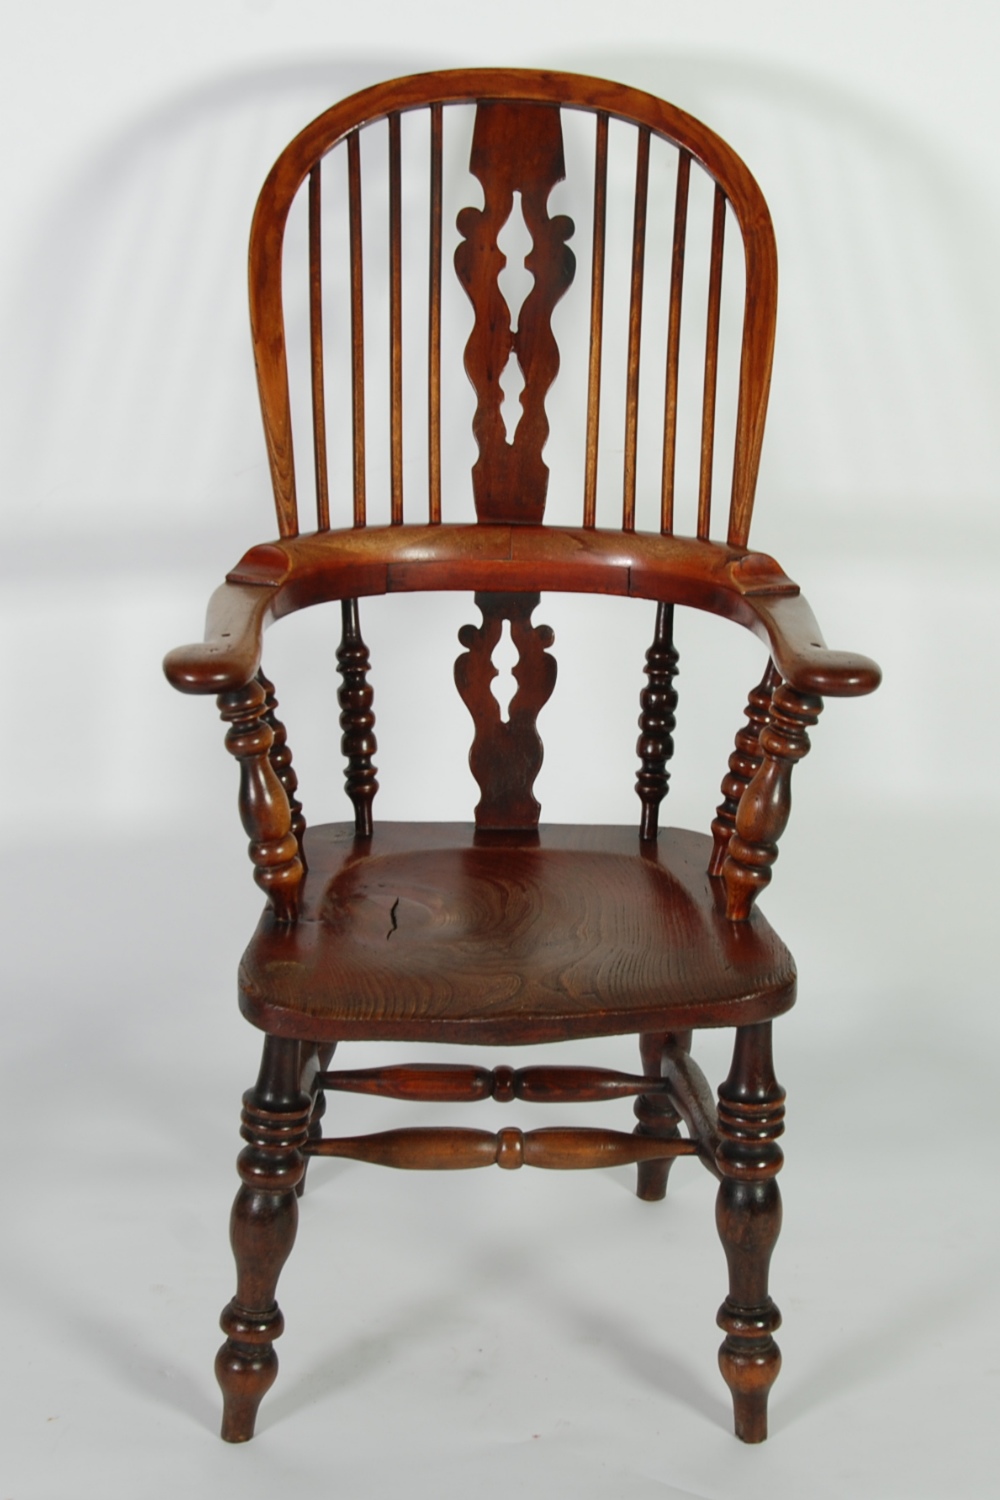 NINETEENTH CENTURY ELM, BEECHWOOD AND FRUITWOOD HIGH BACK WINDSOR CHAIR, the turned legs joined by